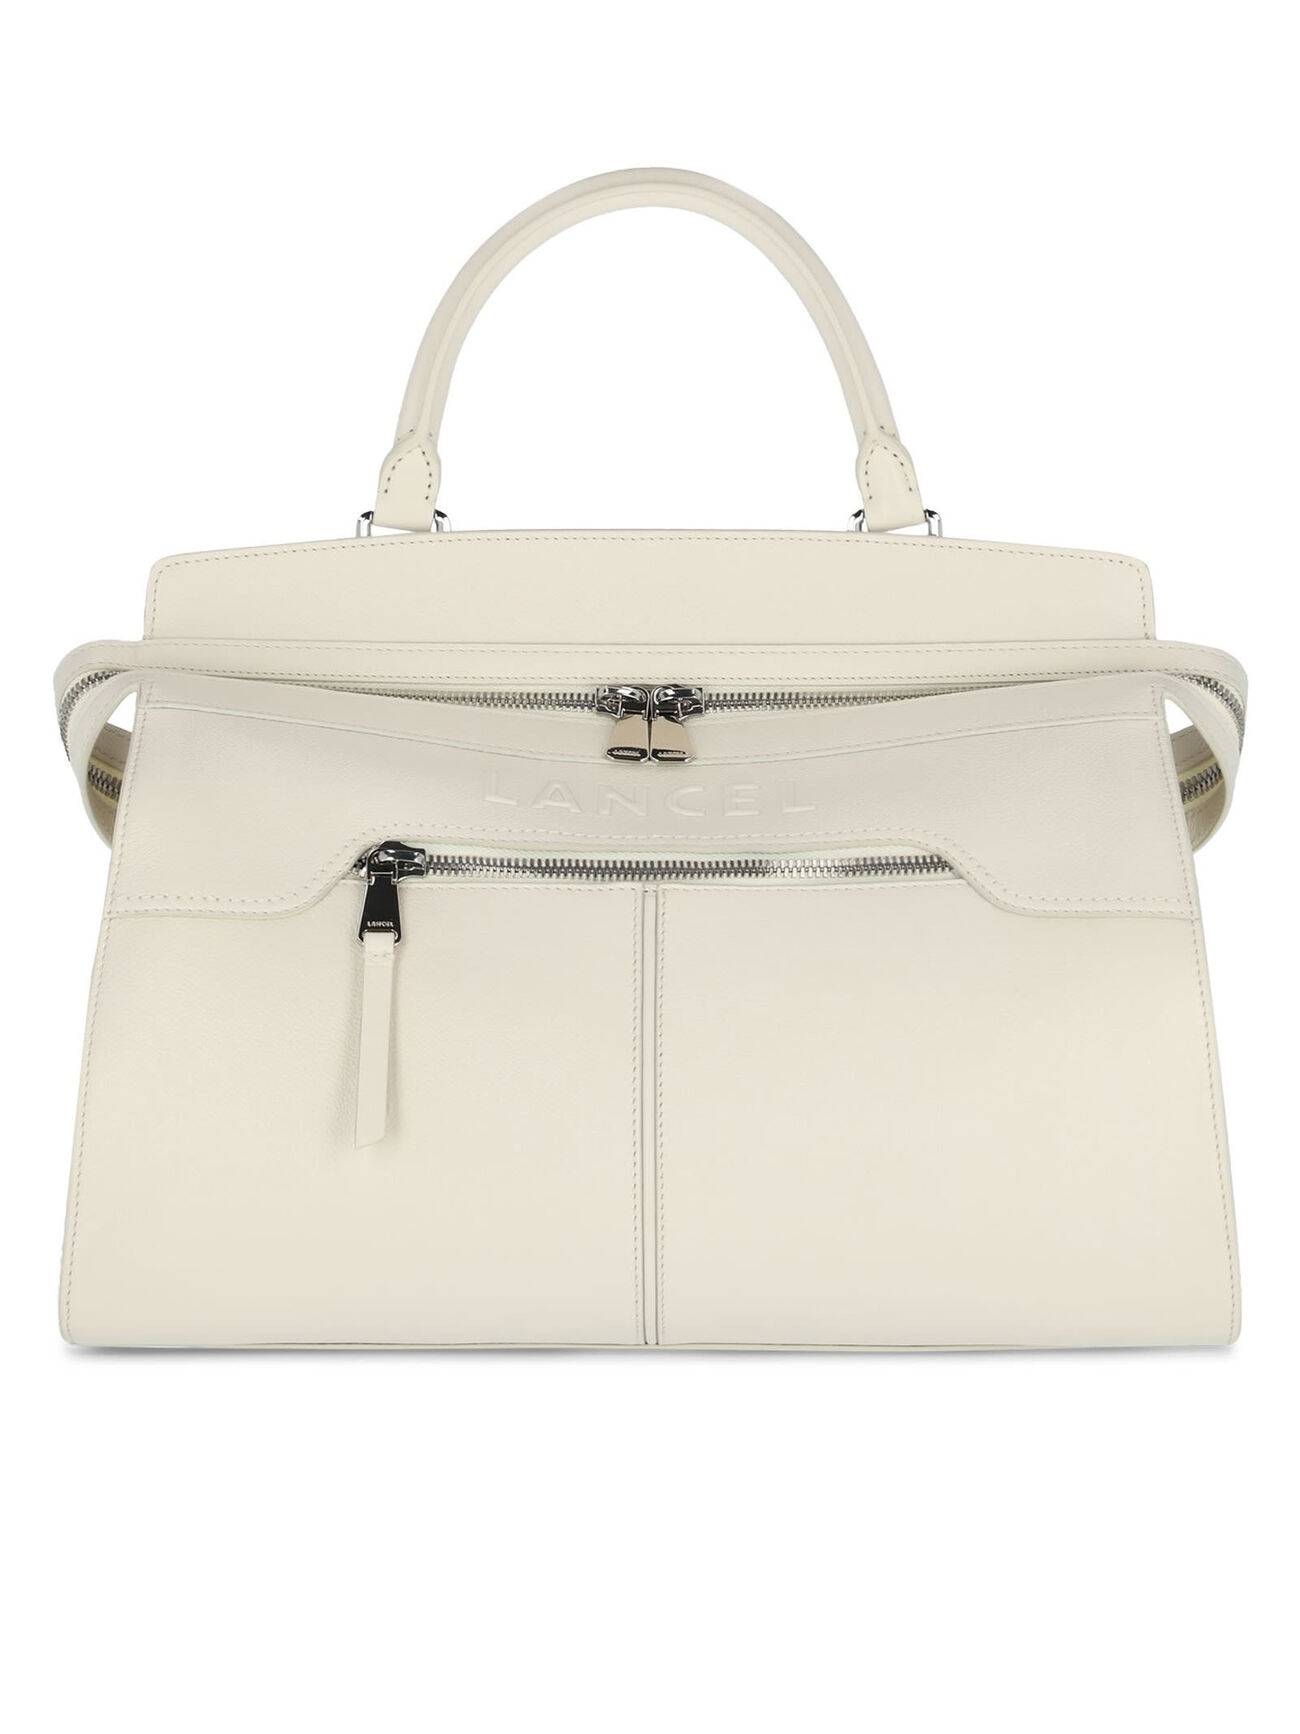 Lancel White Grained Cowhide Leather Bag